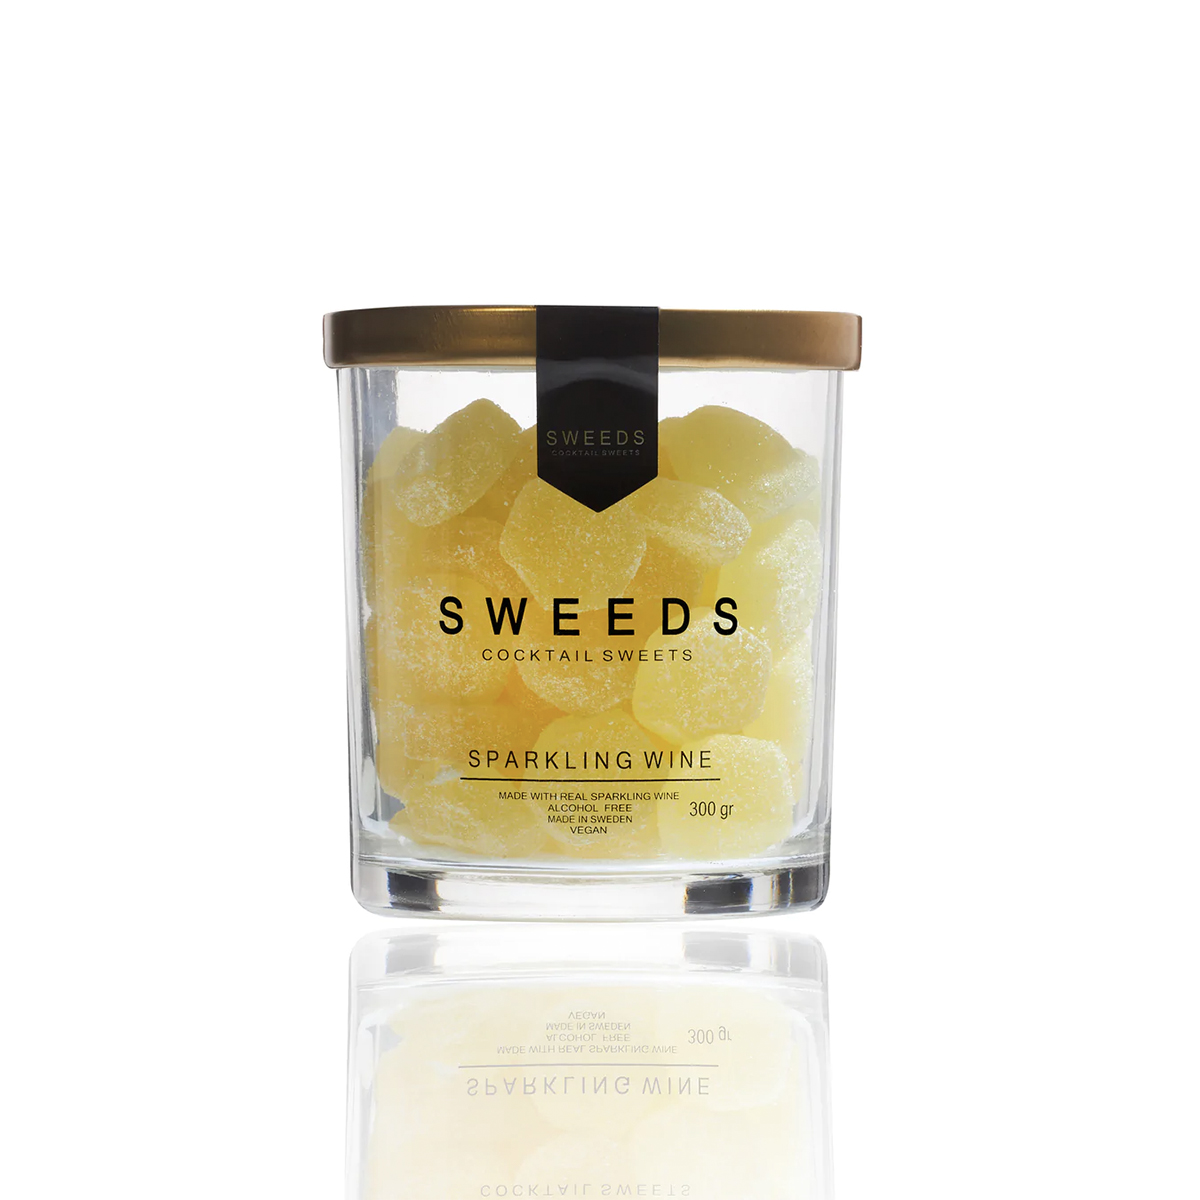 Sweeds Sparkling Wine Cocktail Sweets